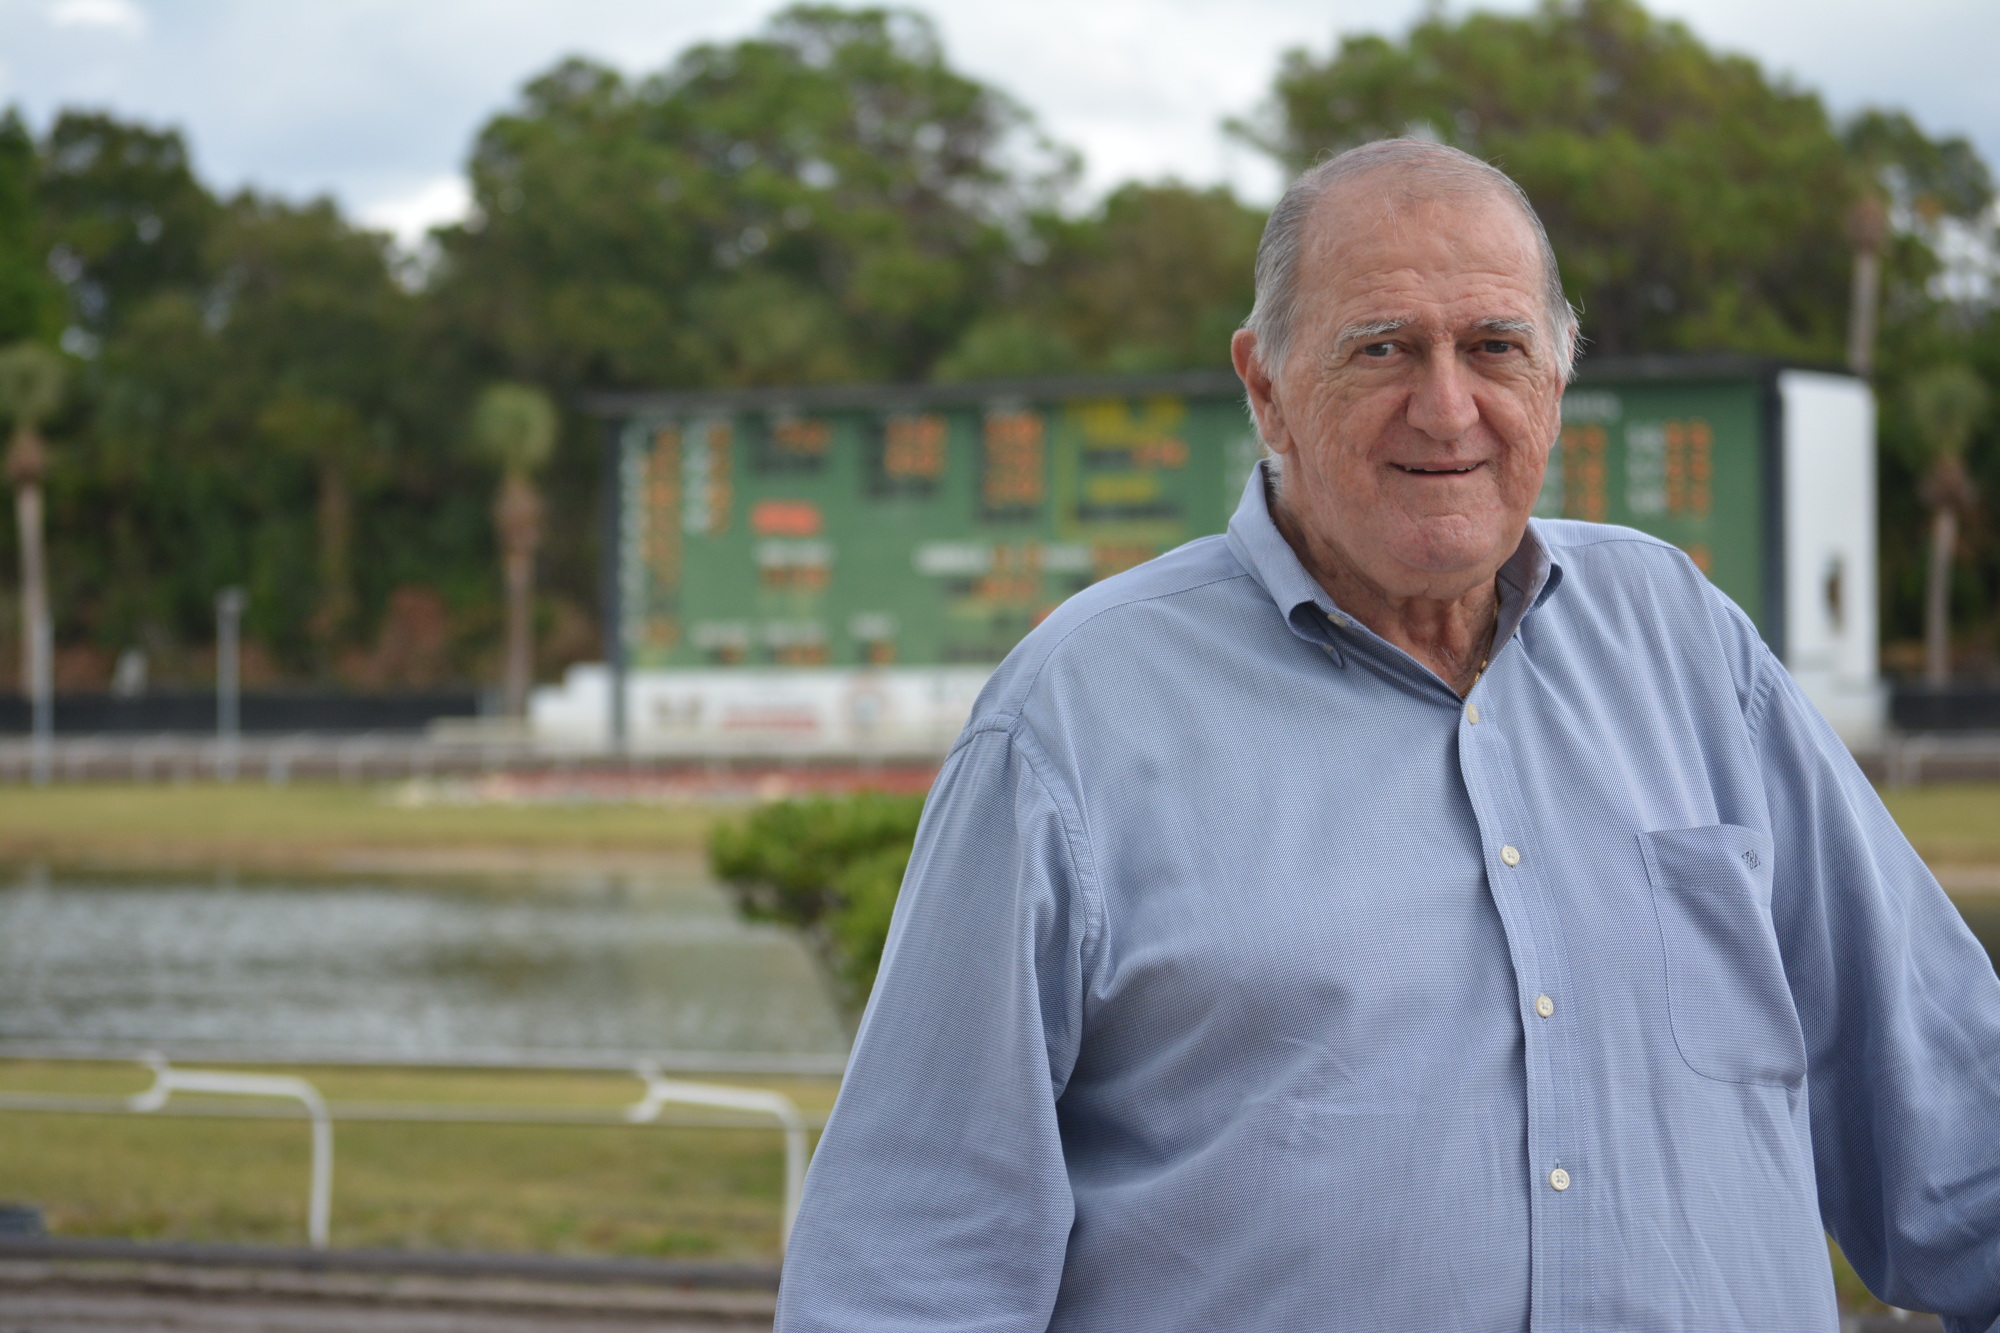 Thomas Bowersox has worked in greyhound racing for 55 years.